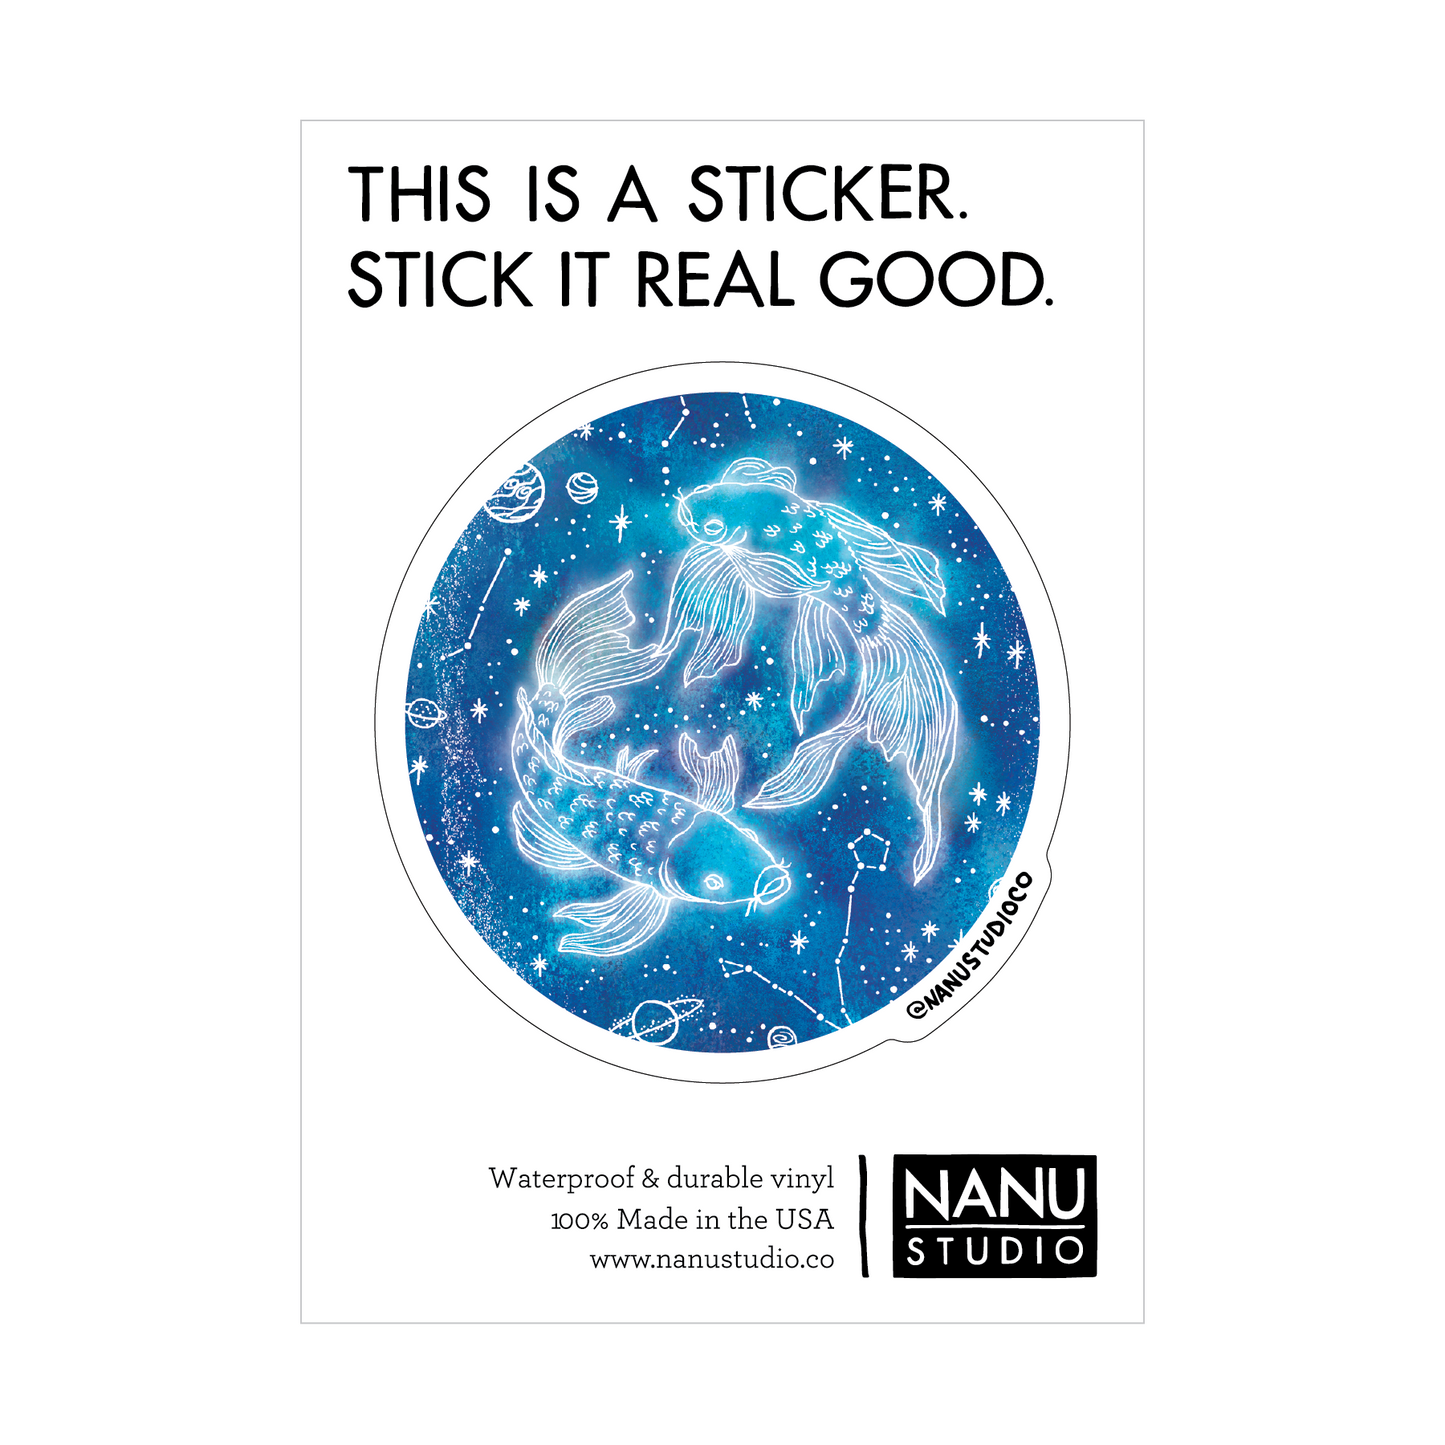 An illustrated sticker featuring a dark blue starlit background with an image of two fish swimming in the centre which seems as though it's glowing, accompanied by three constellations: Pisces, Aquarius and Aries